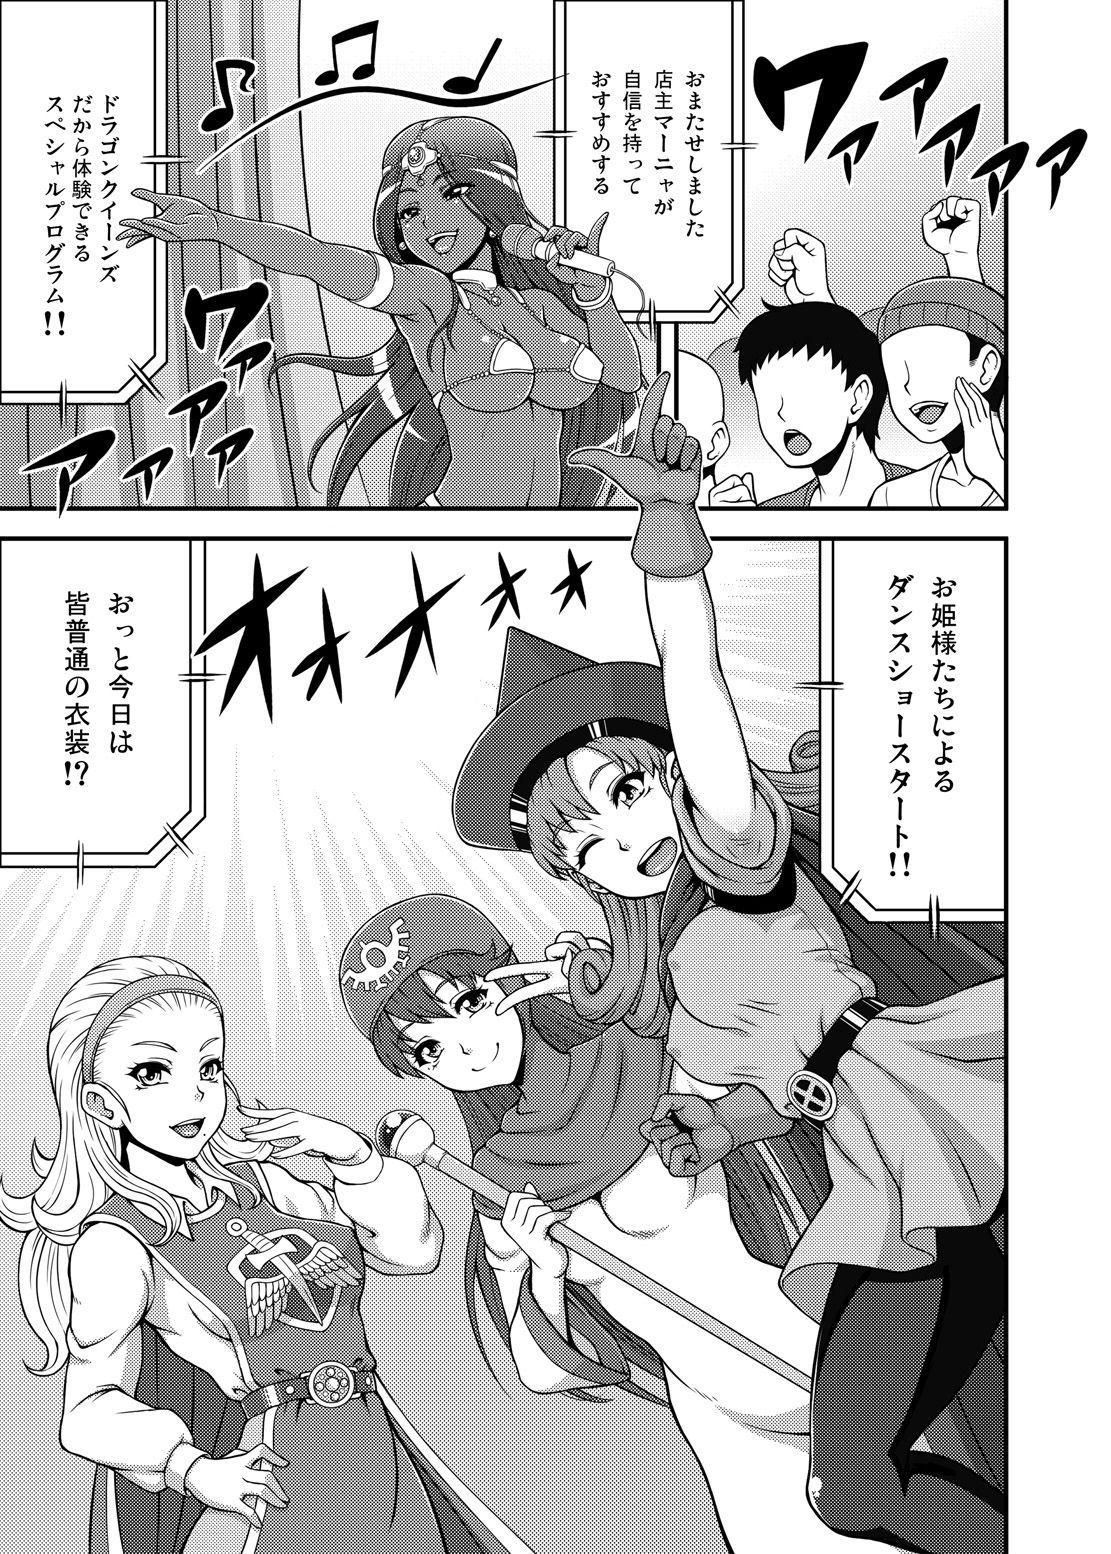 Amatoriale Dragon Queen's 5 - King of fighters Dragon quest Black Girl - Page 3